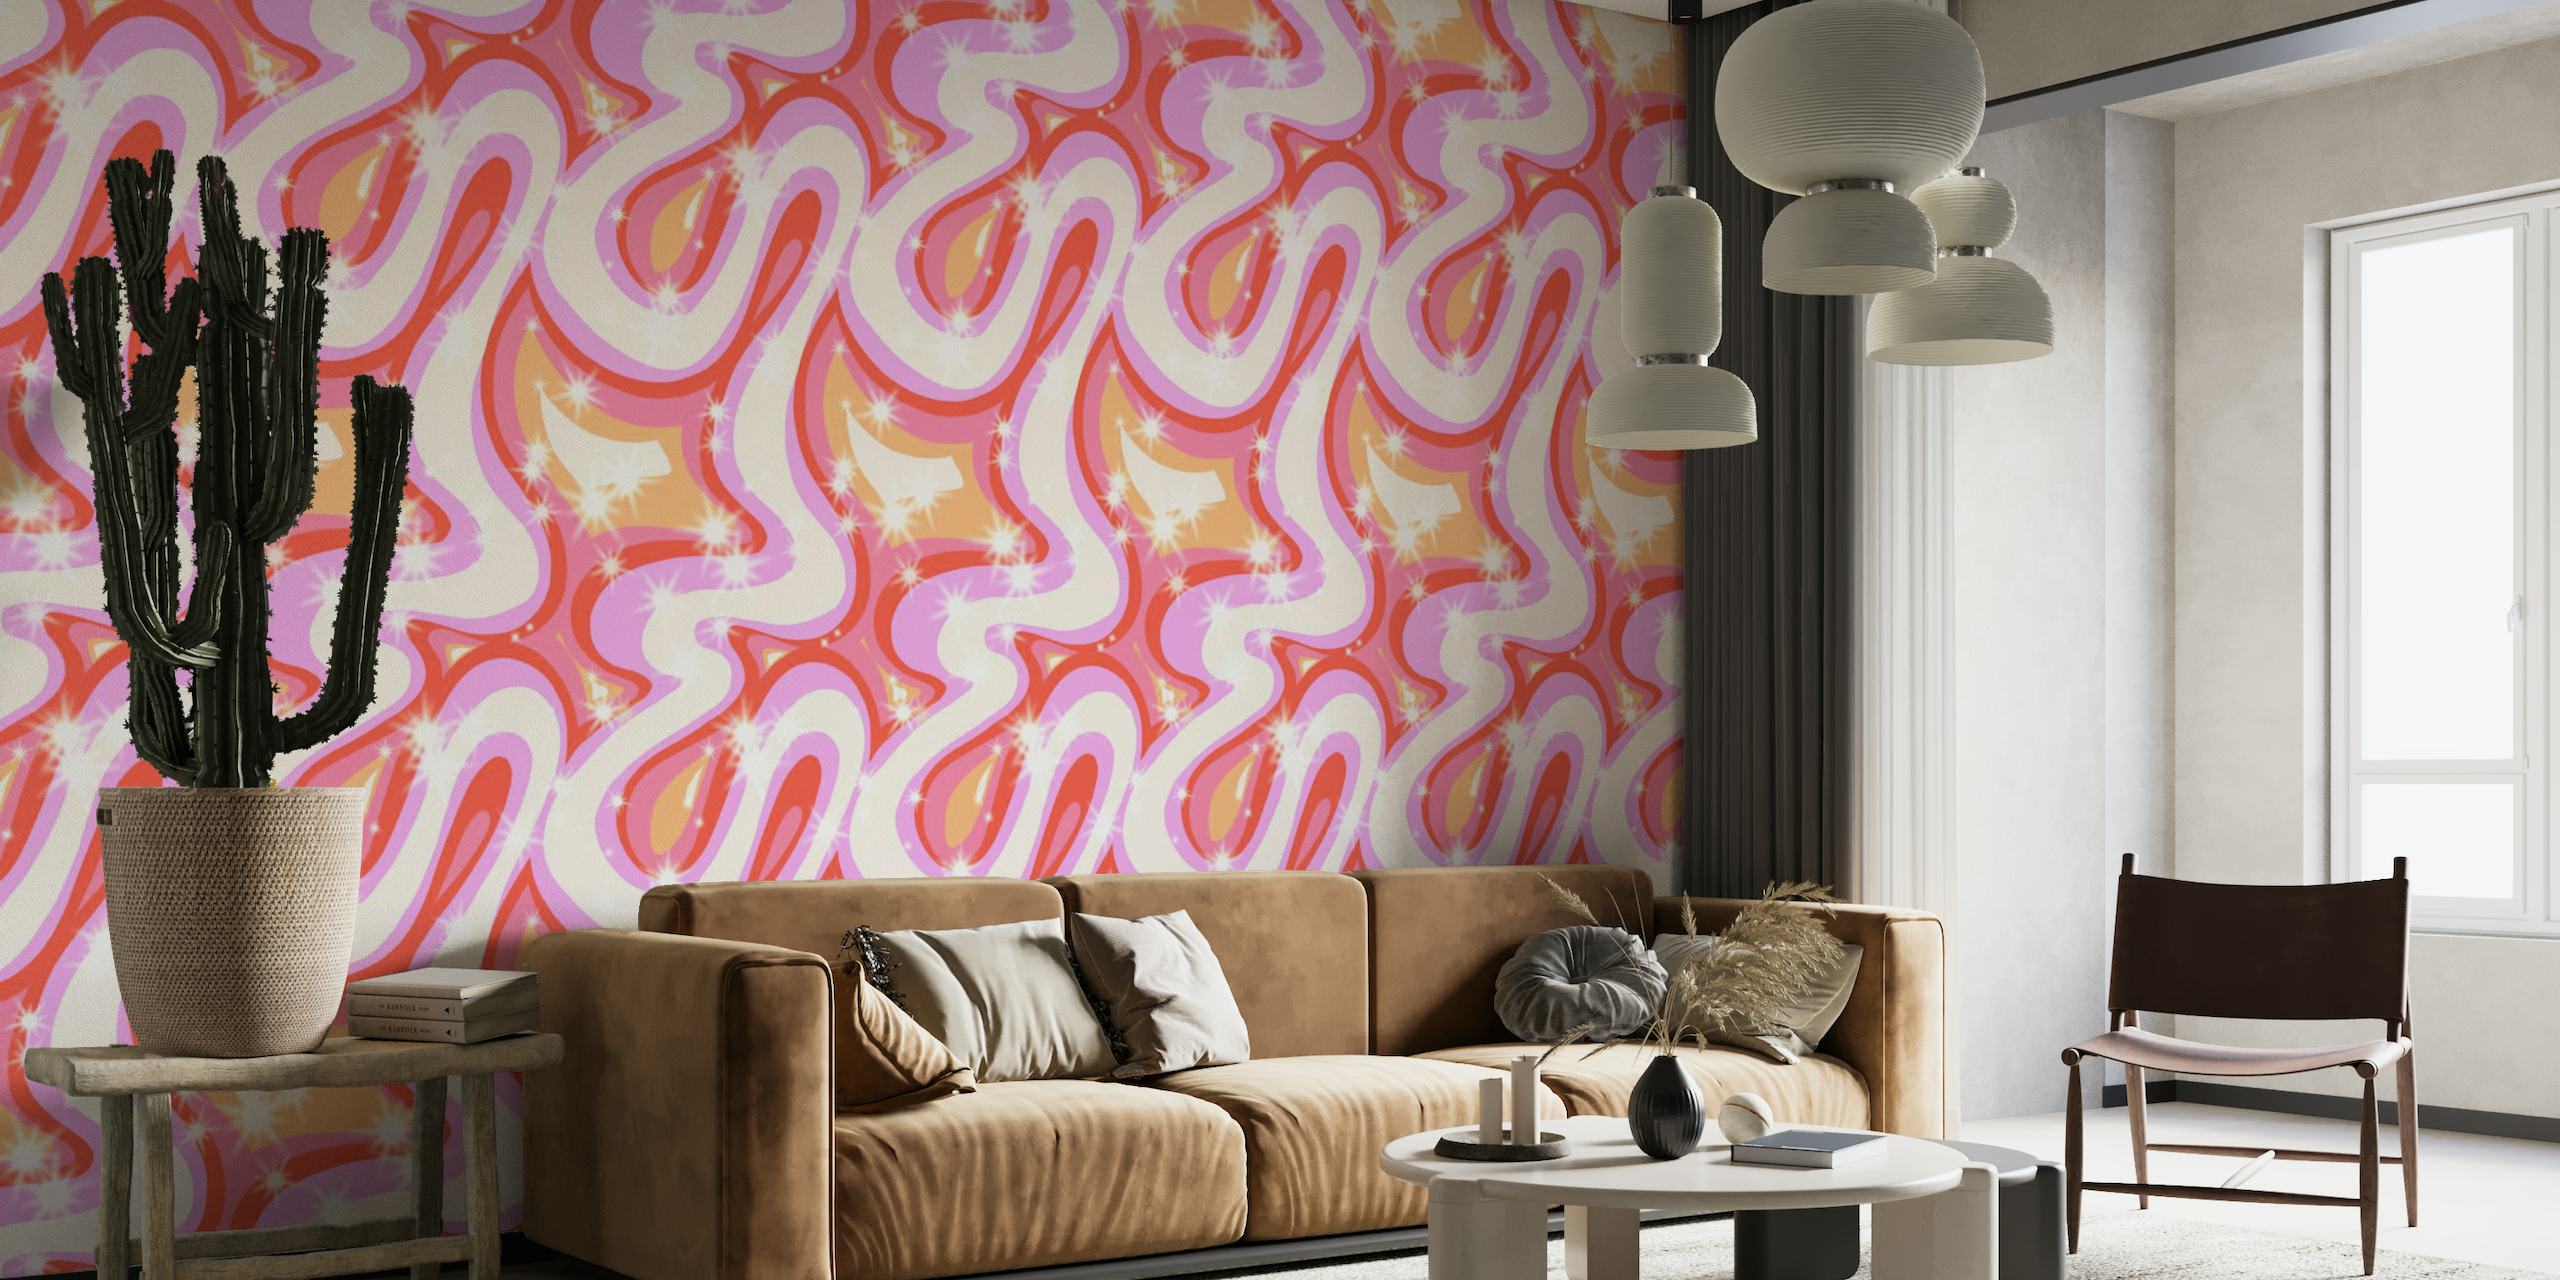 Groovy Party swirls pink tapety